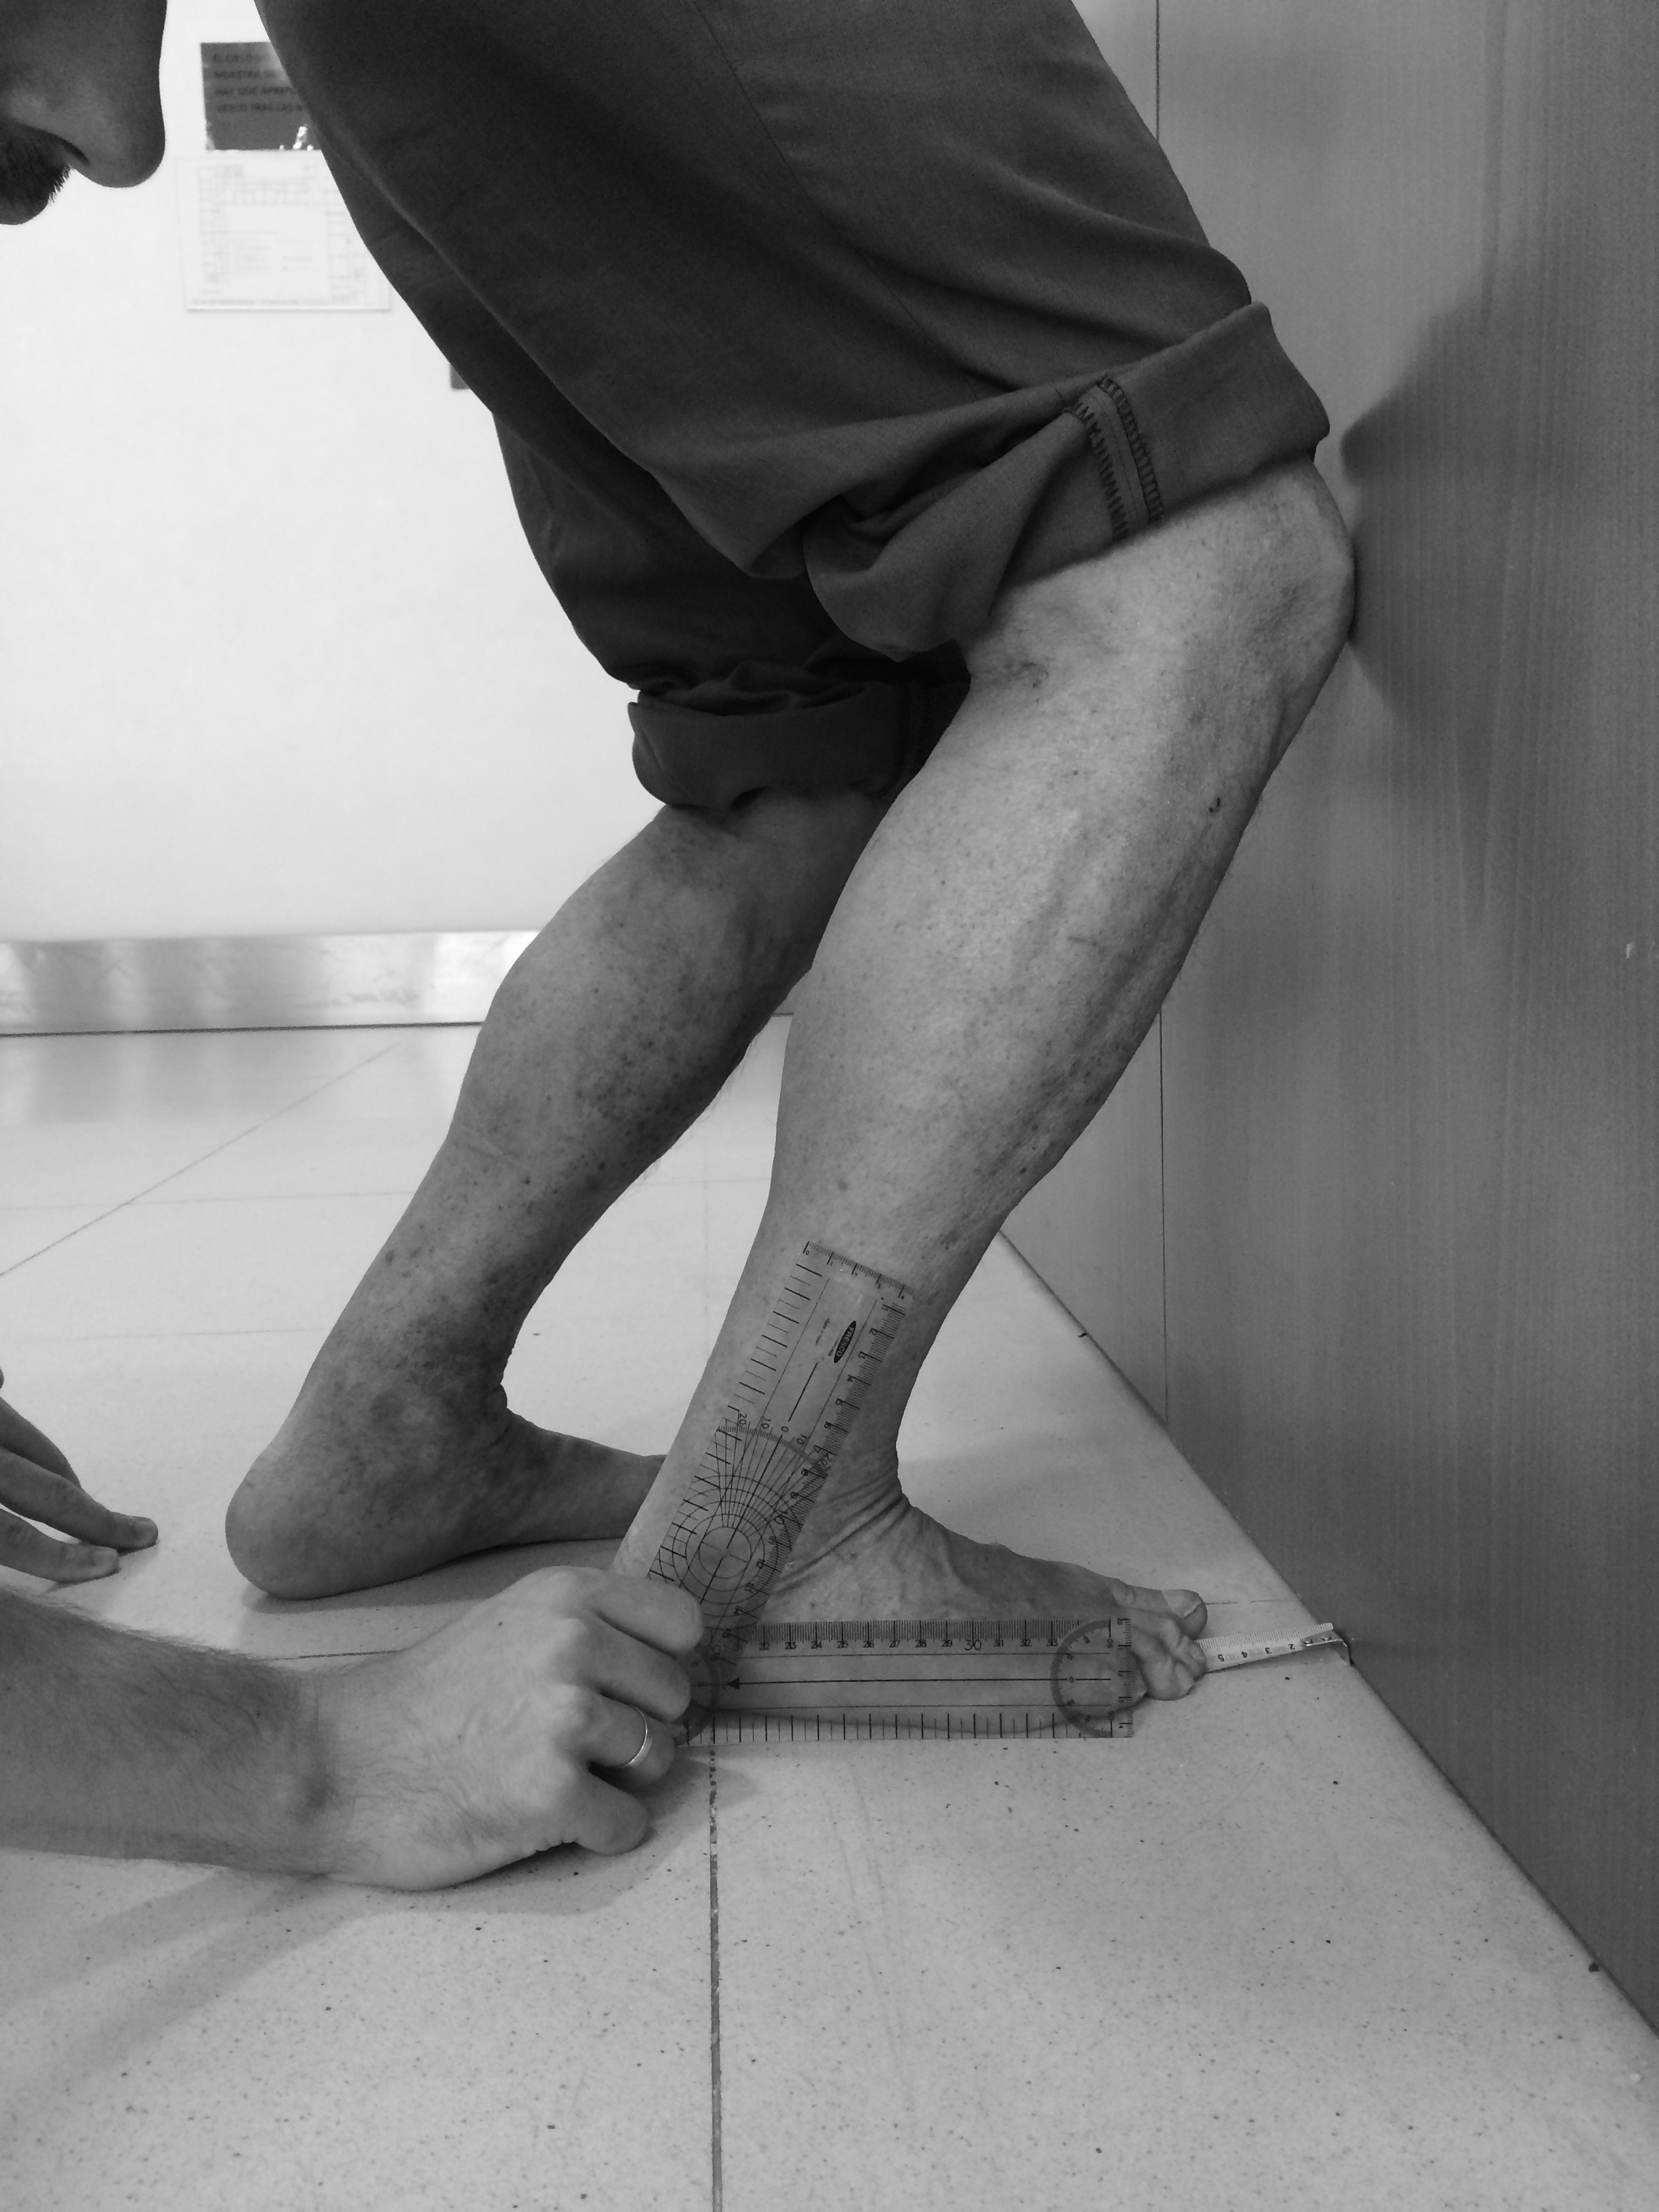 The concurrent validity and reliability of the Leg Motion system